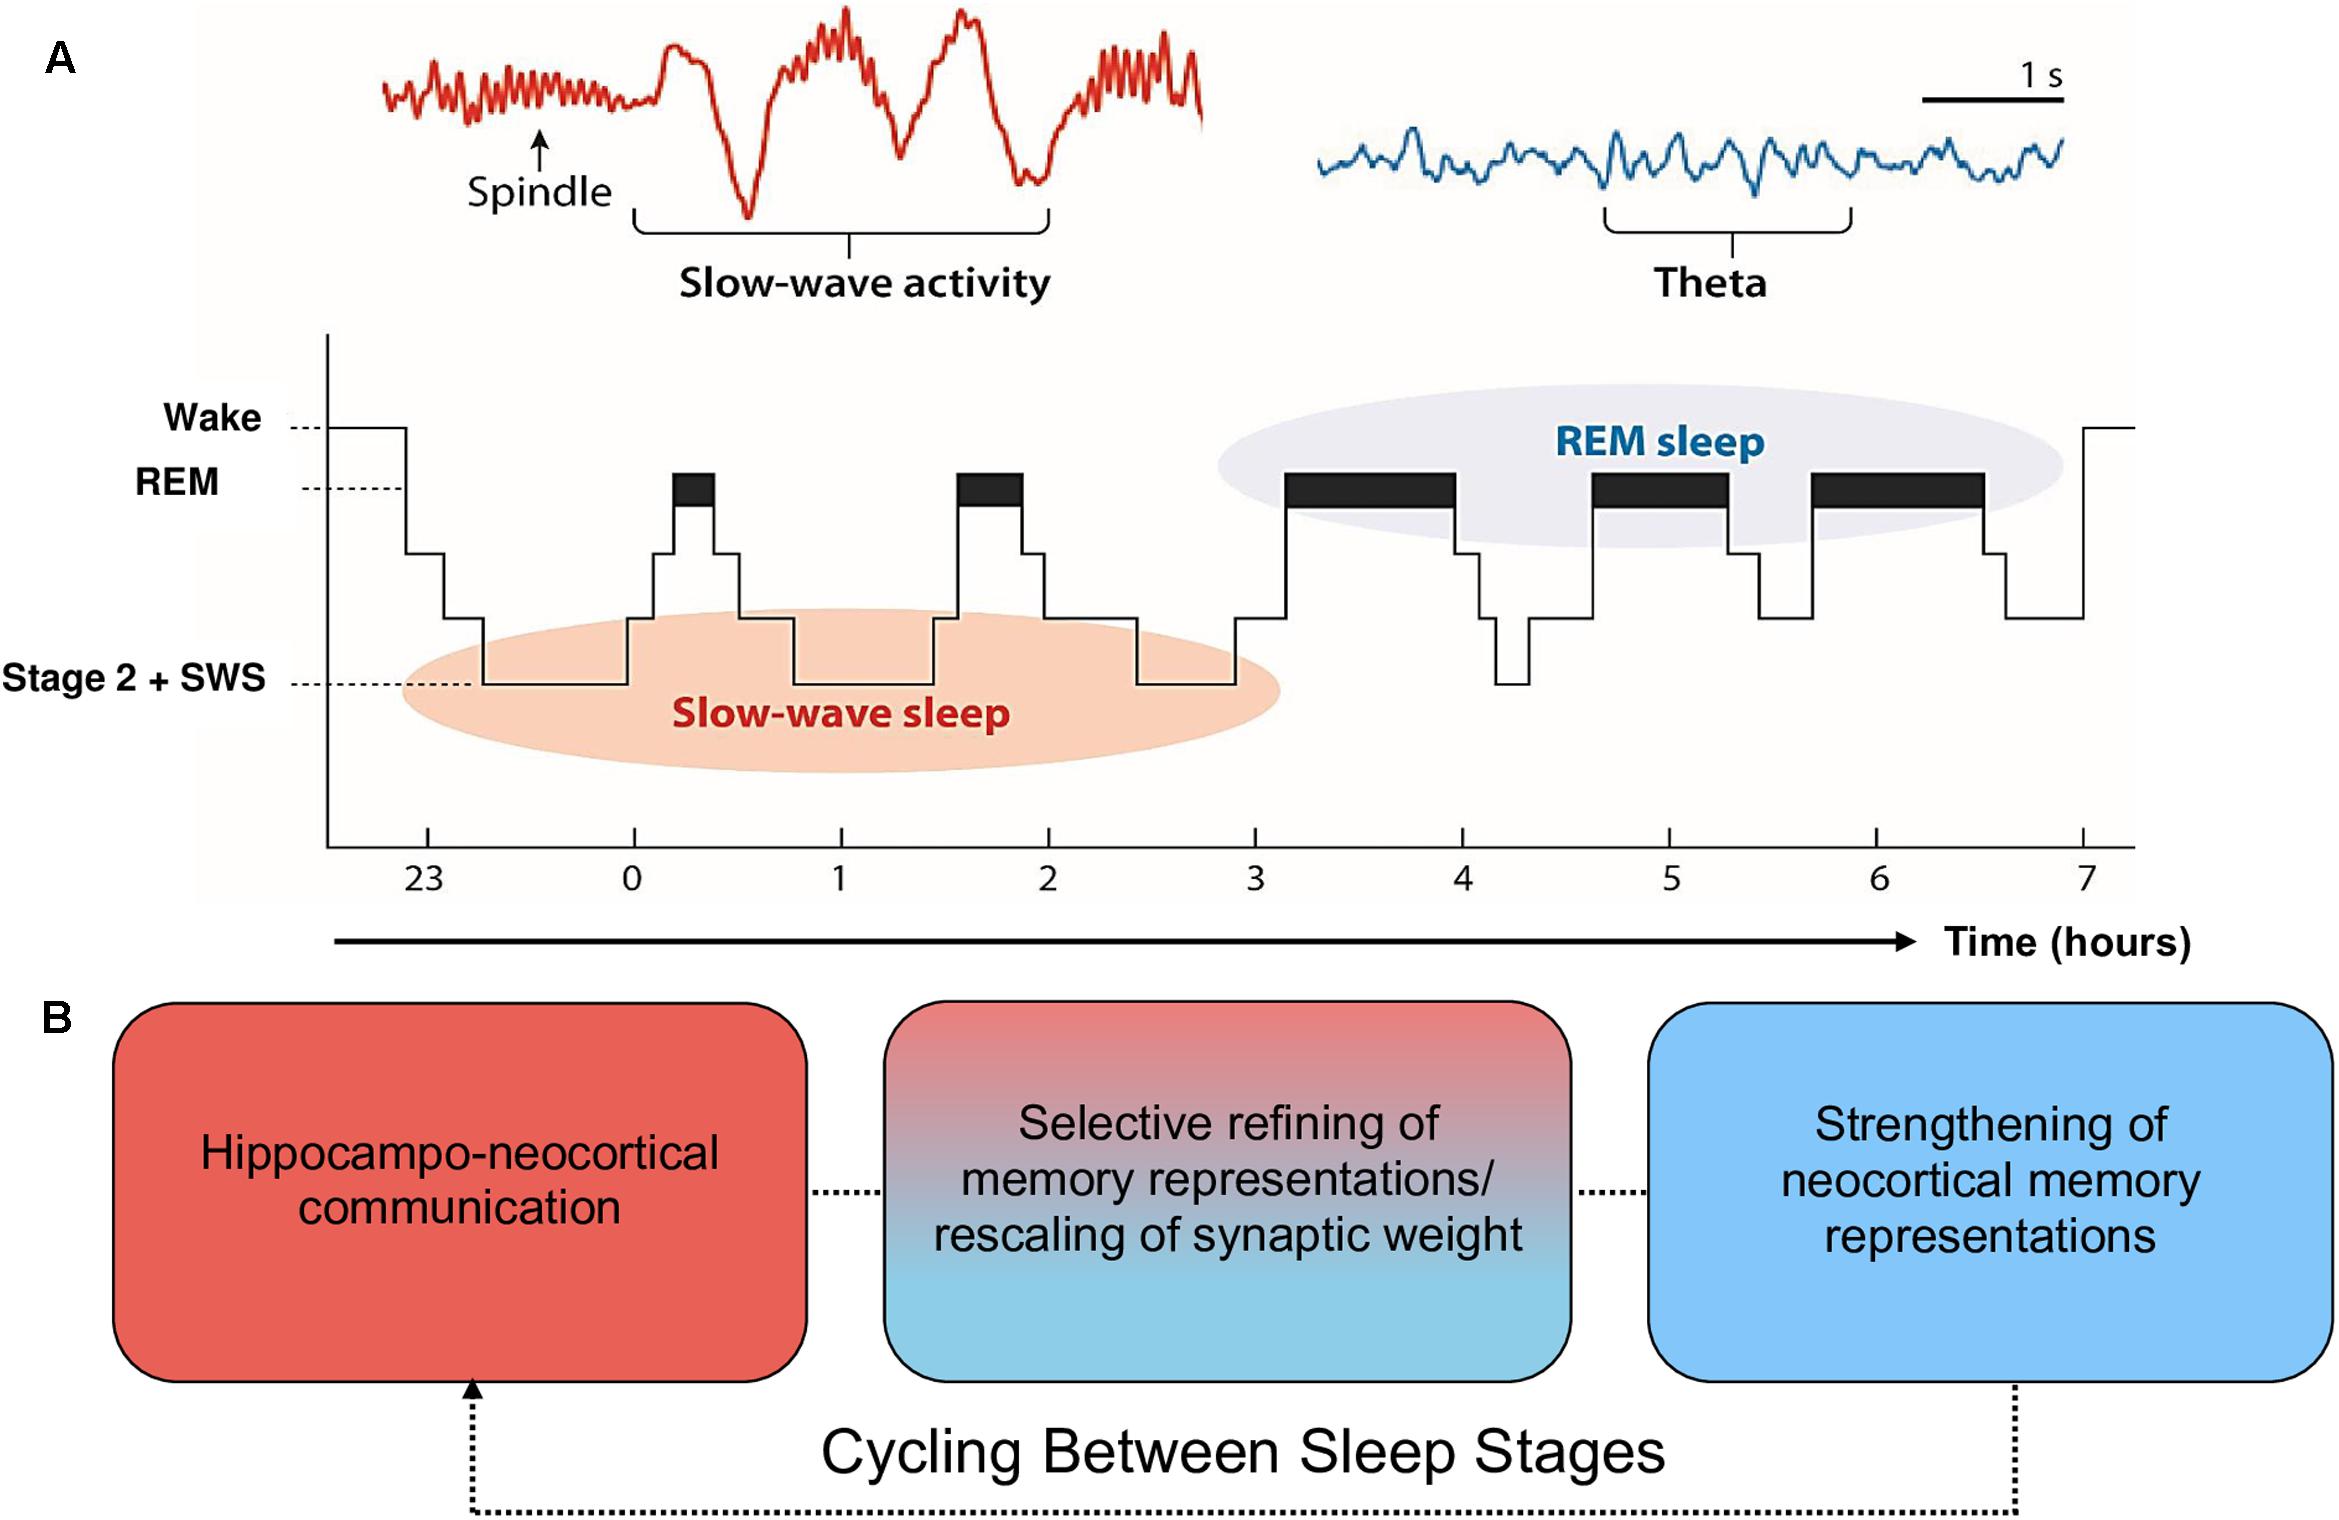 What role does deep sleep play in memory consolidation and learning?